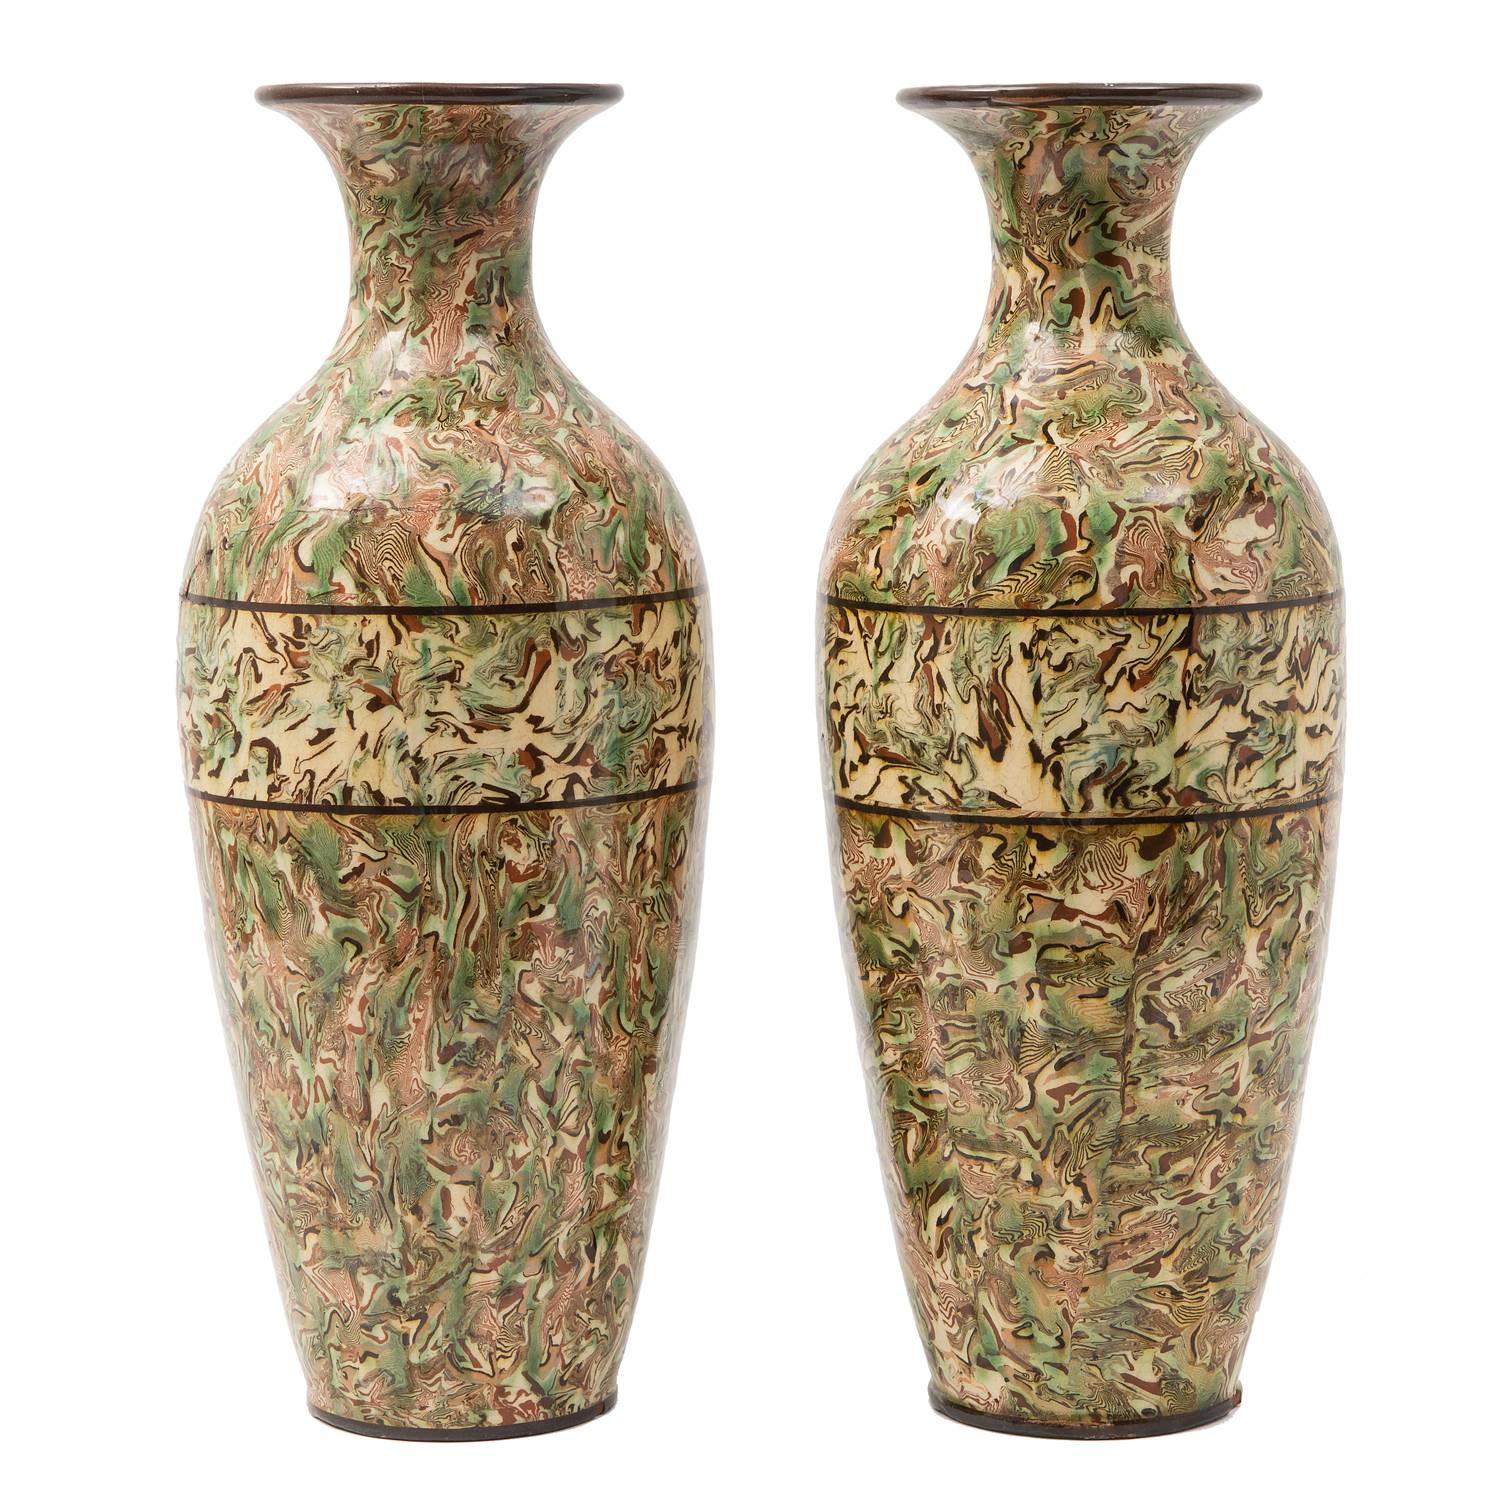 Pair of French Mosaic Faience Vases, circa 1880